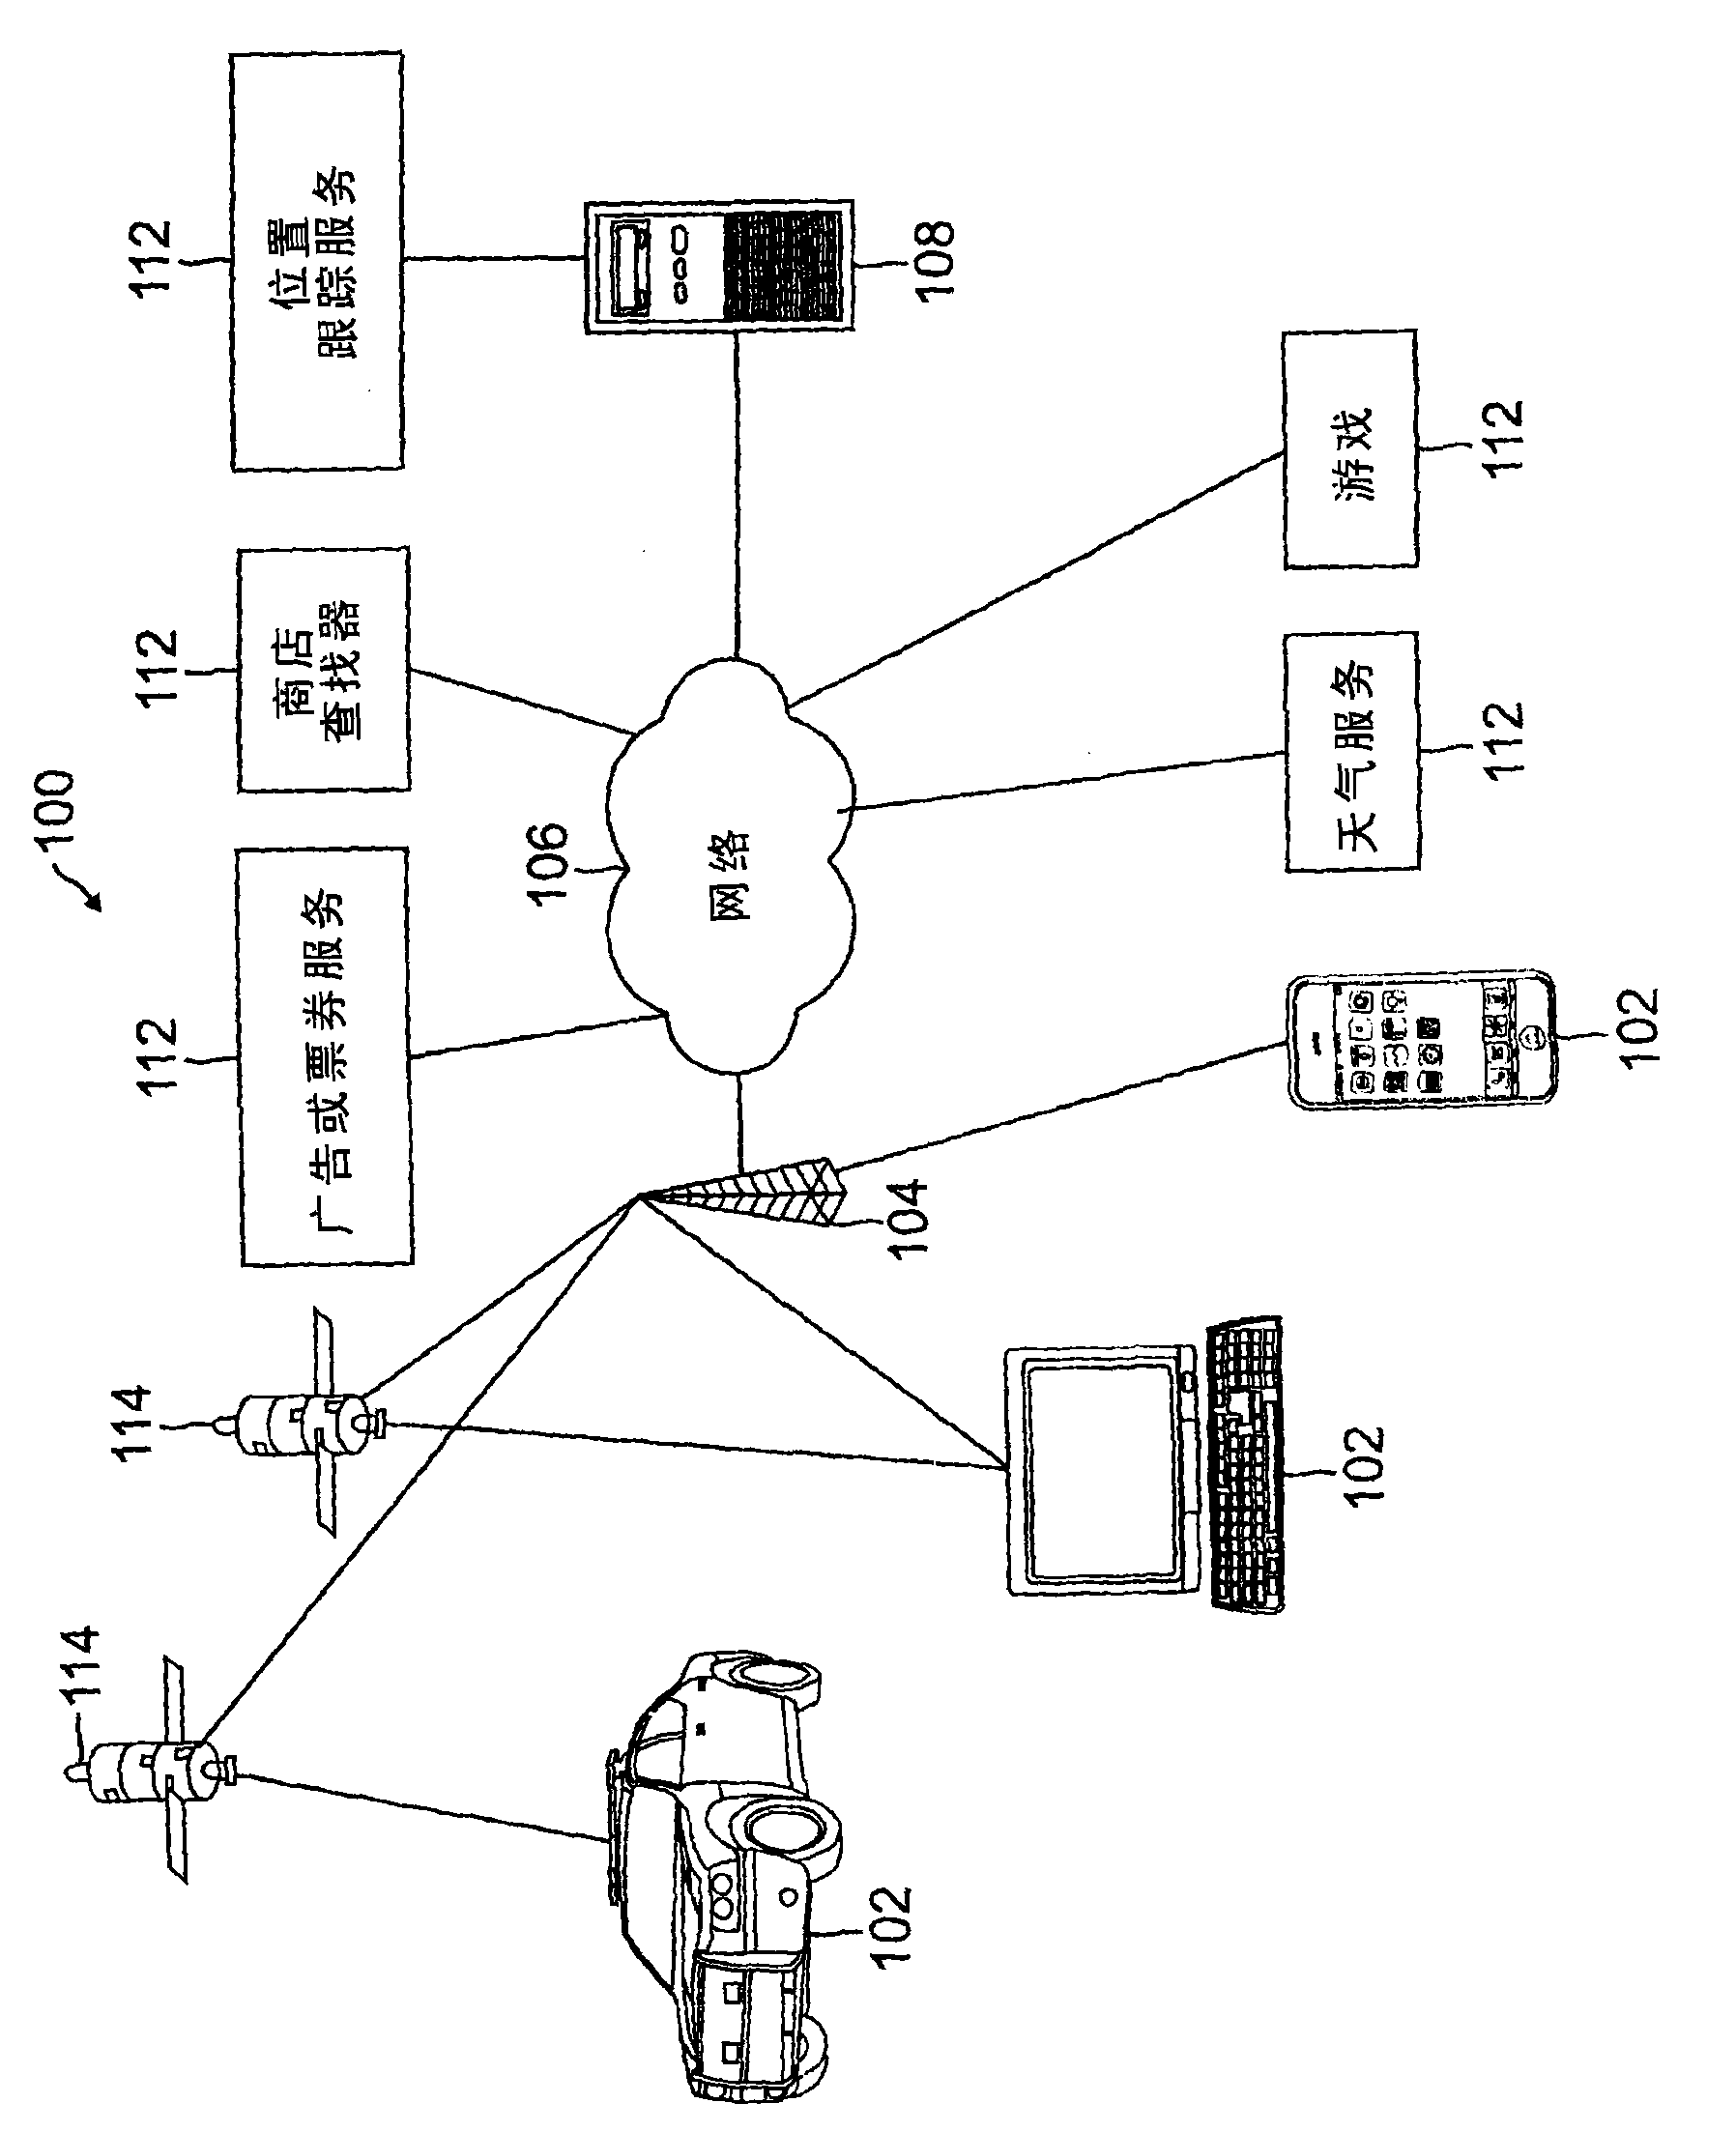 Power management system and method for mobile applications using location based services